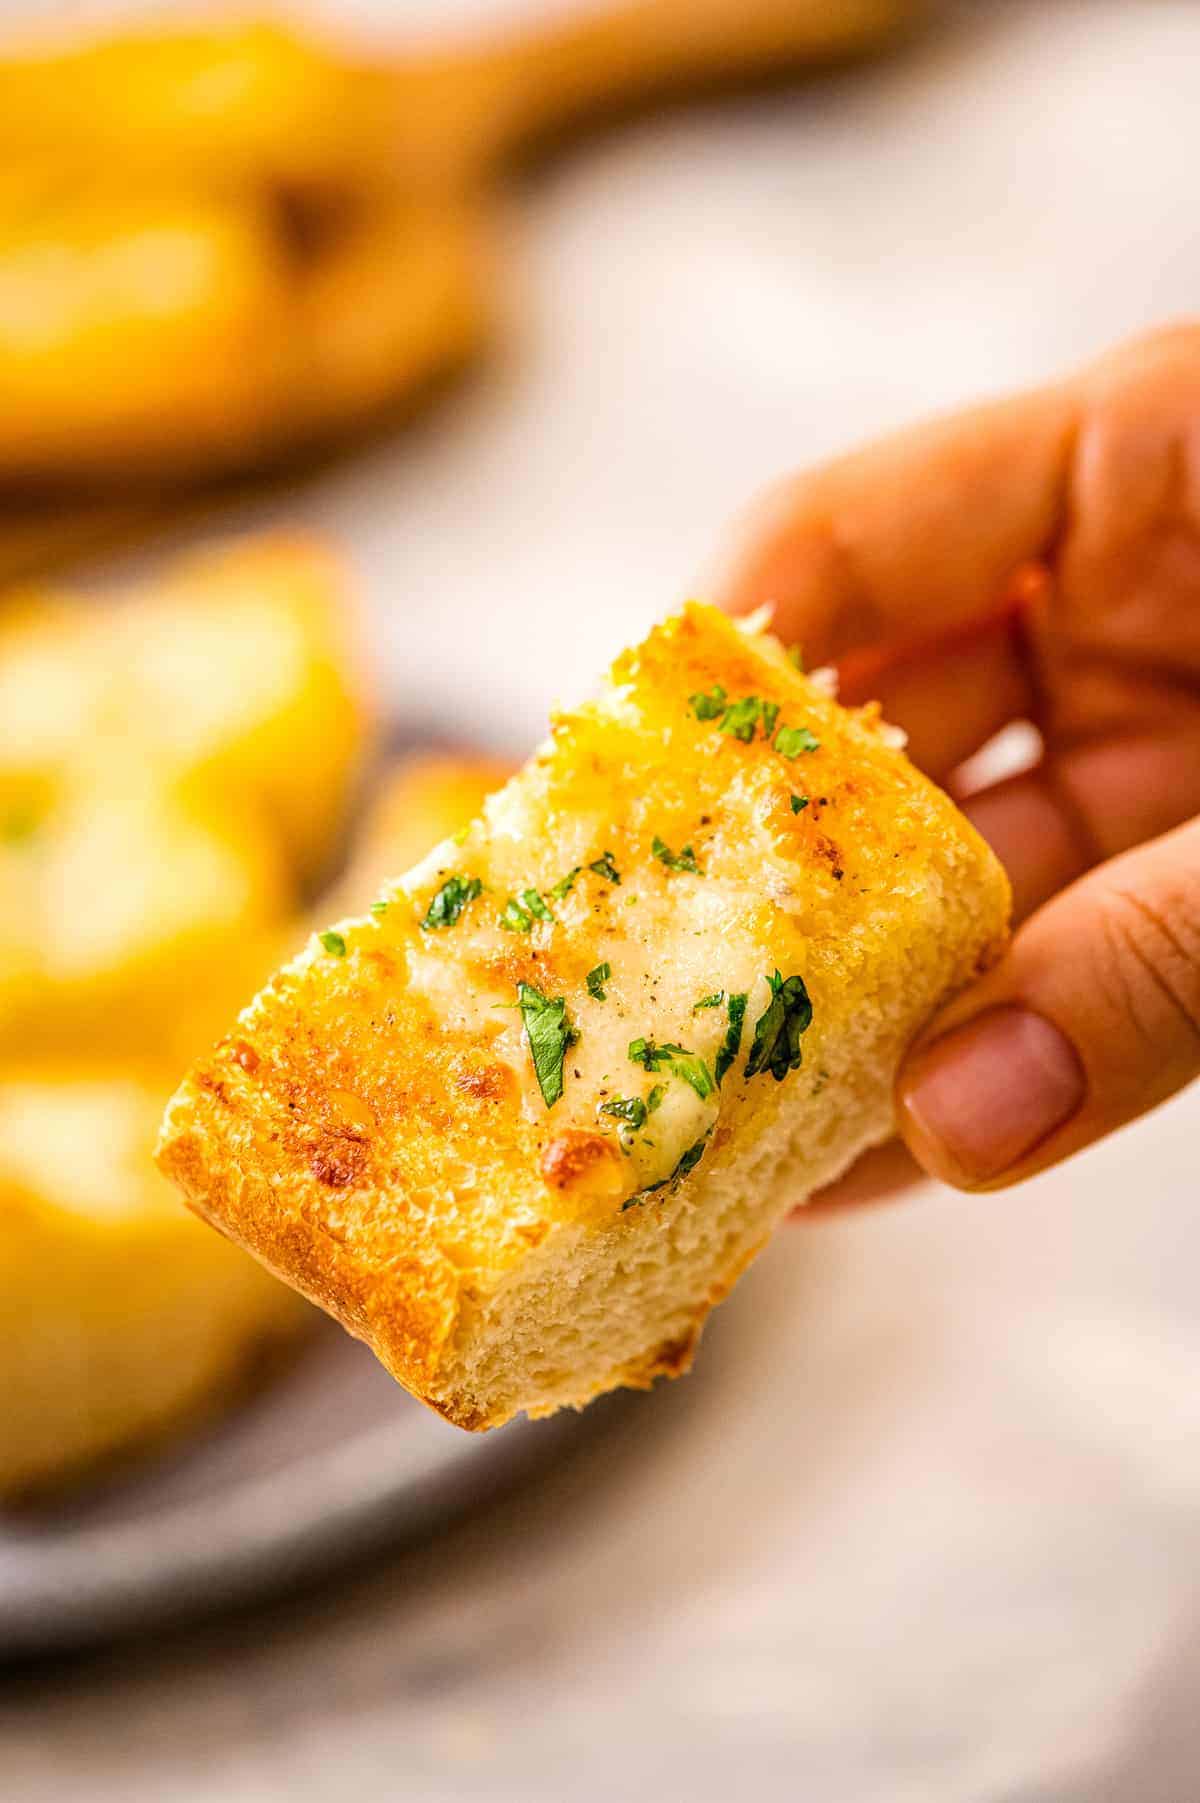 Piece of garlic bread with chopped parsley in hand